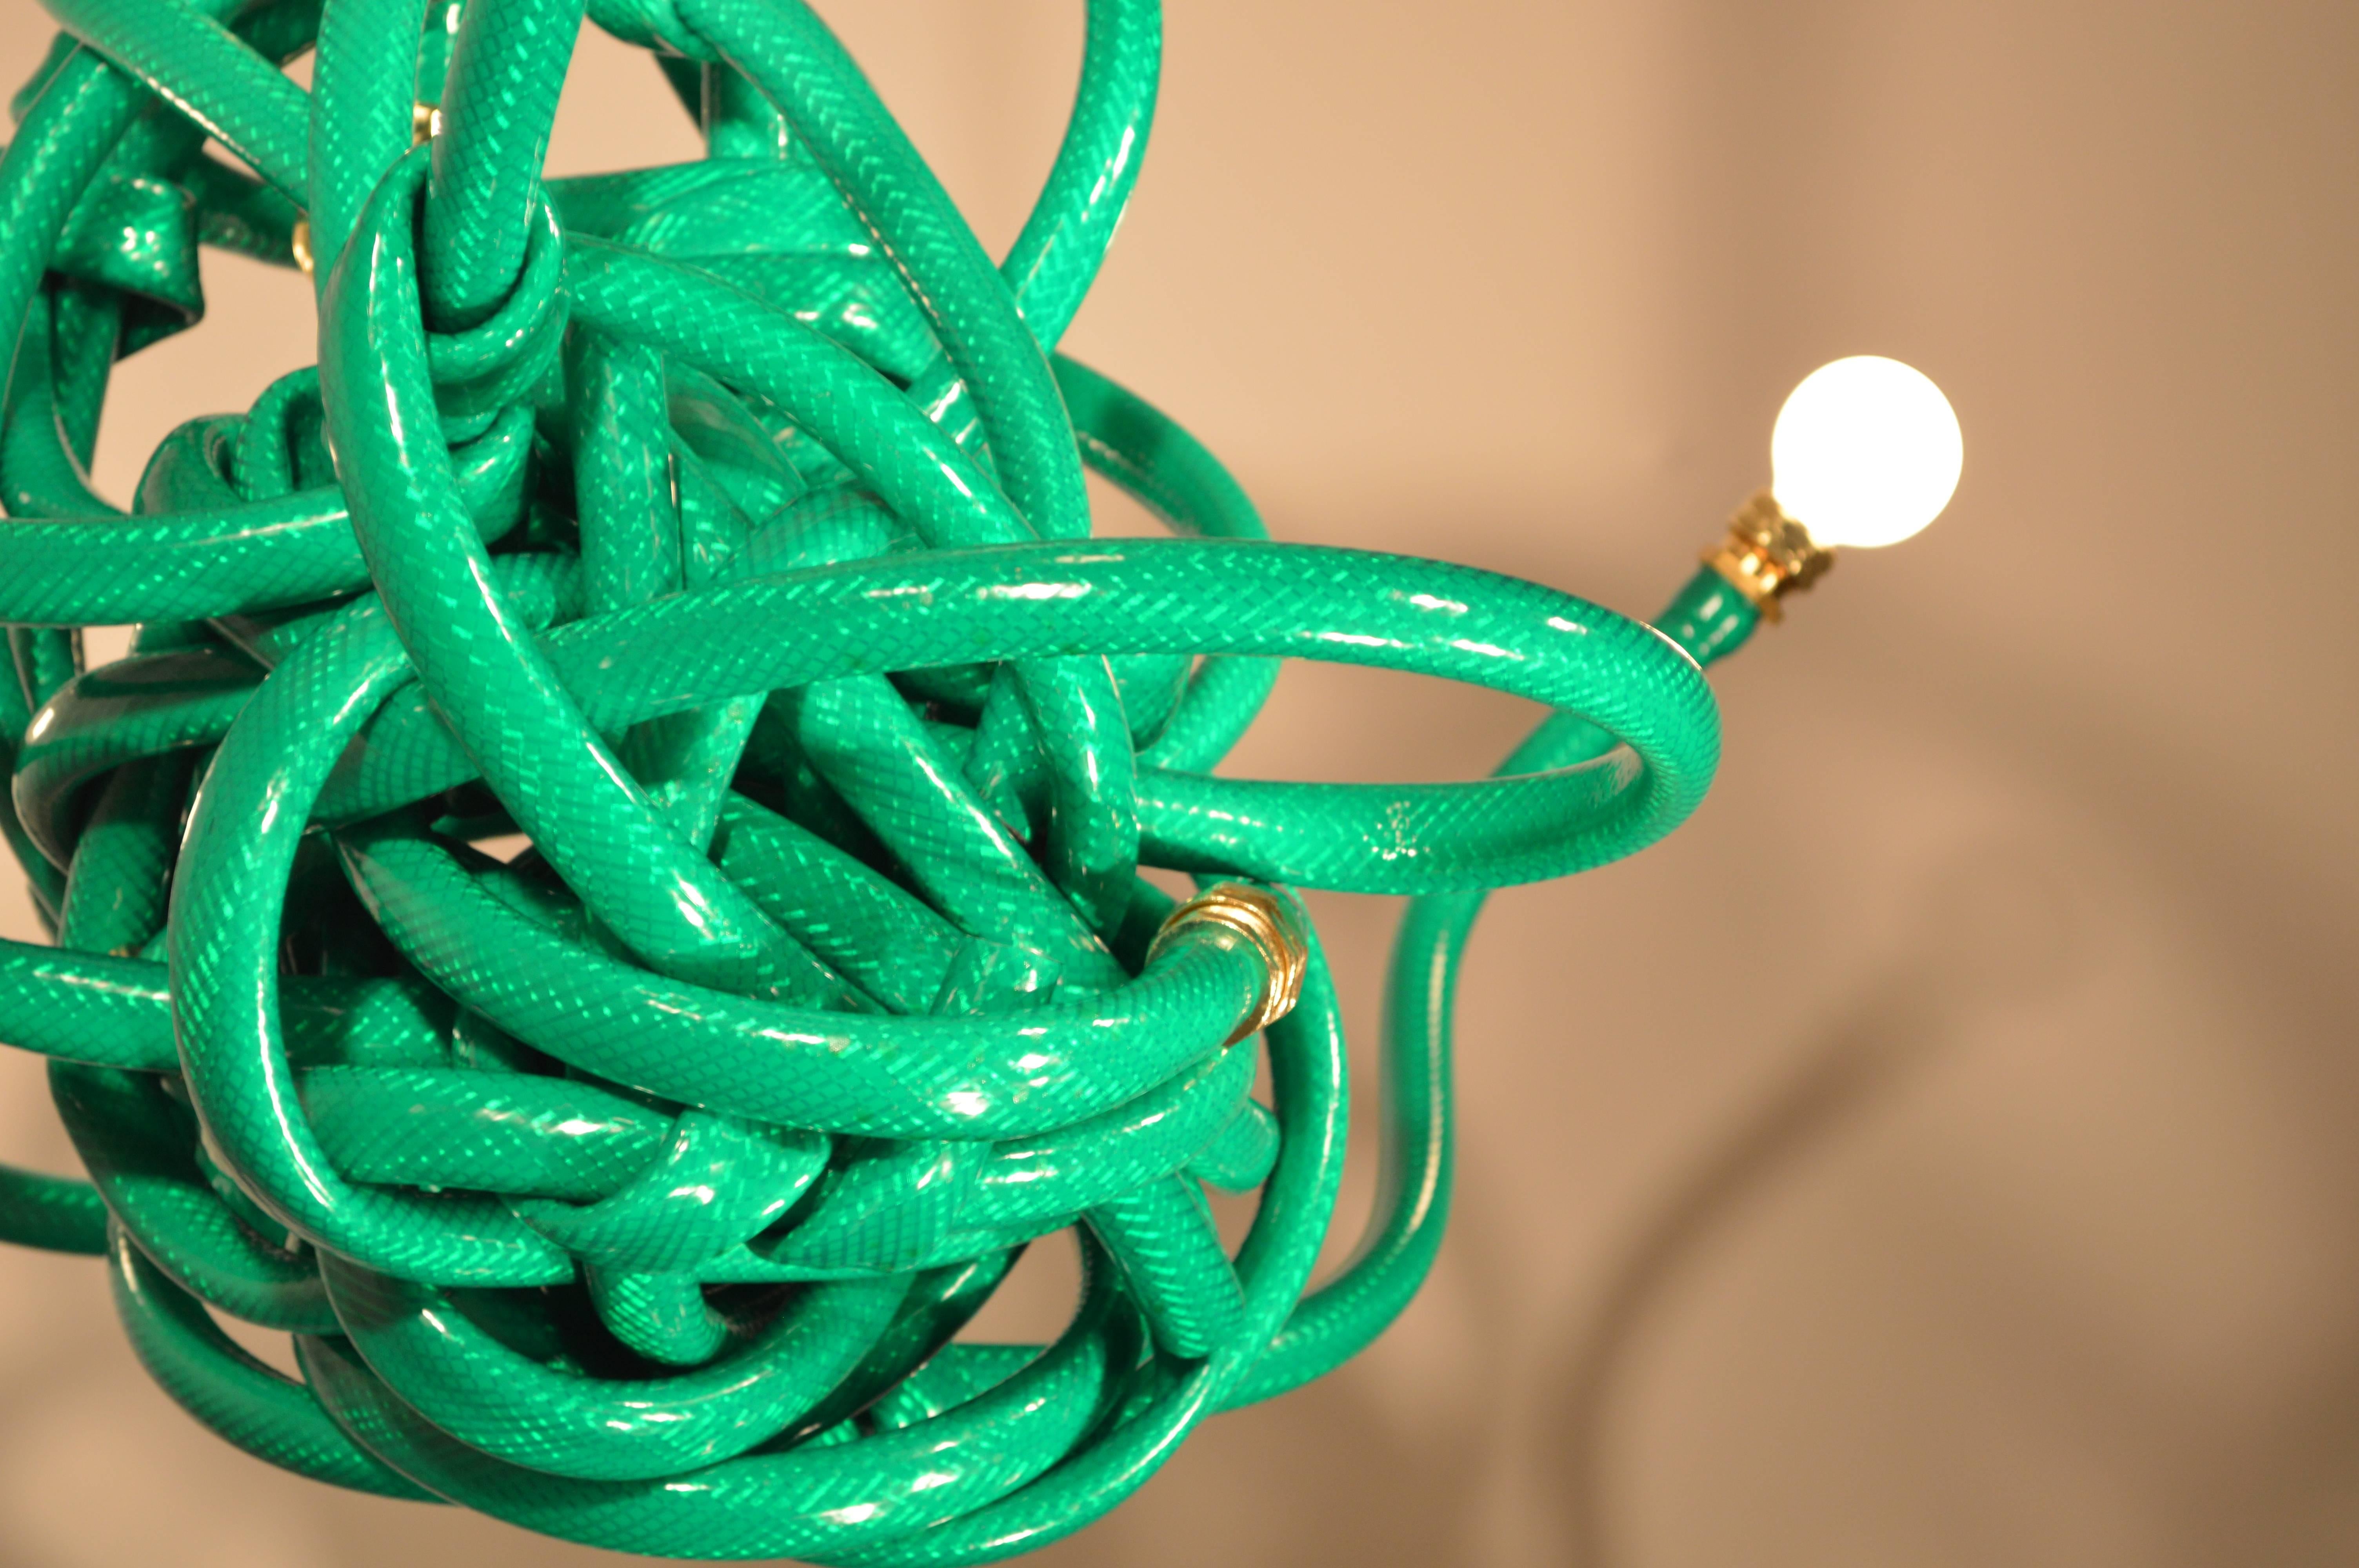 Green Garden Hose Chandelier Style Lighting Fixture, Justin Cooper Studios In New Condition For Sale In Brooklyn, NY